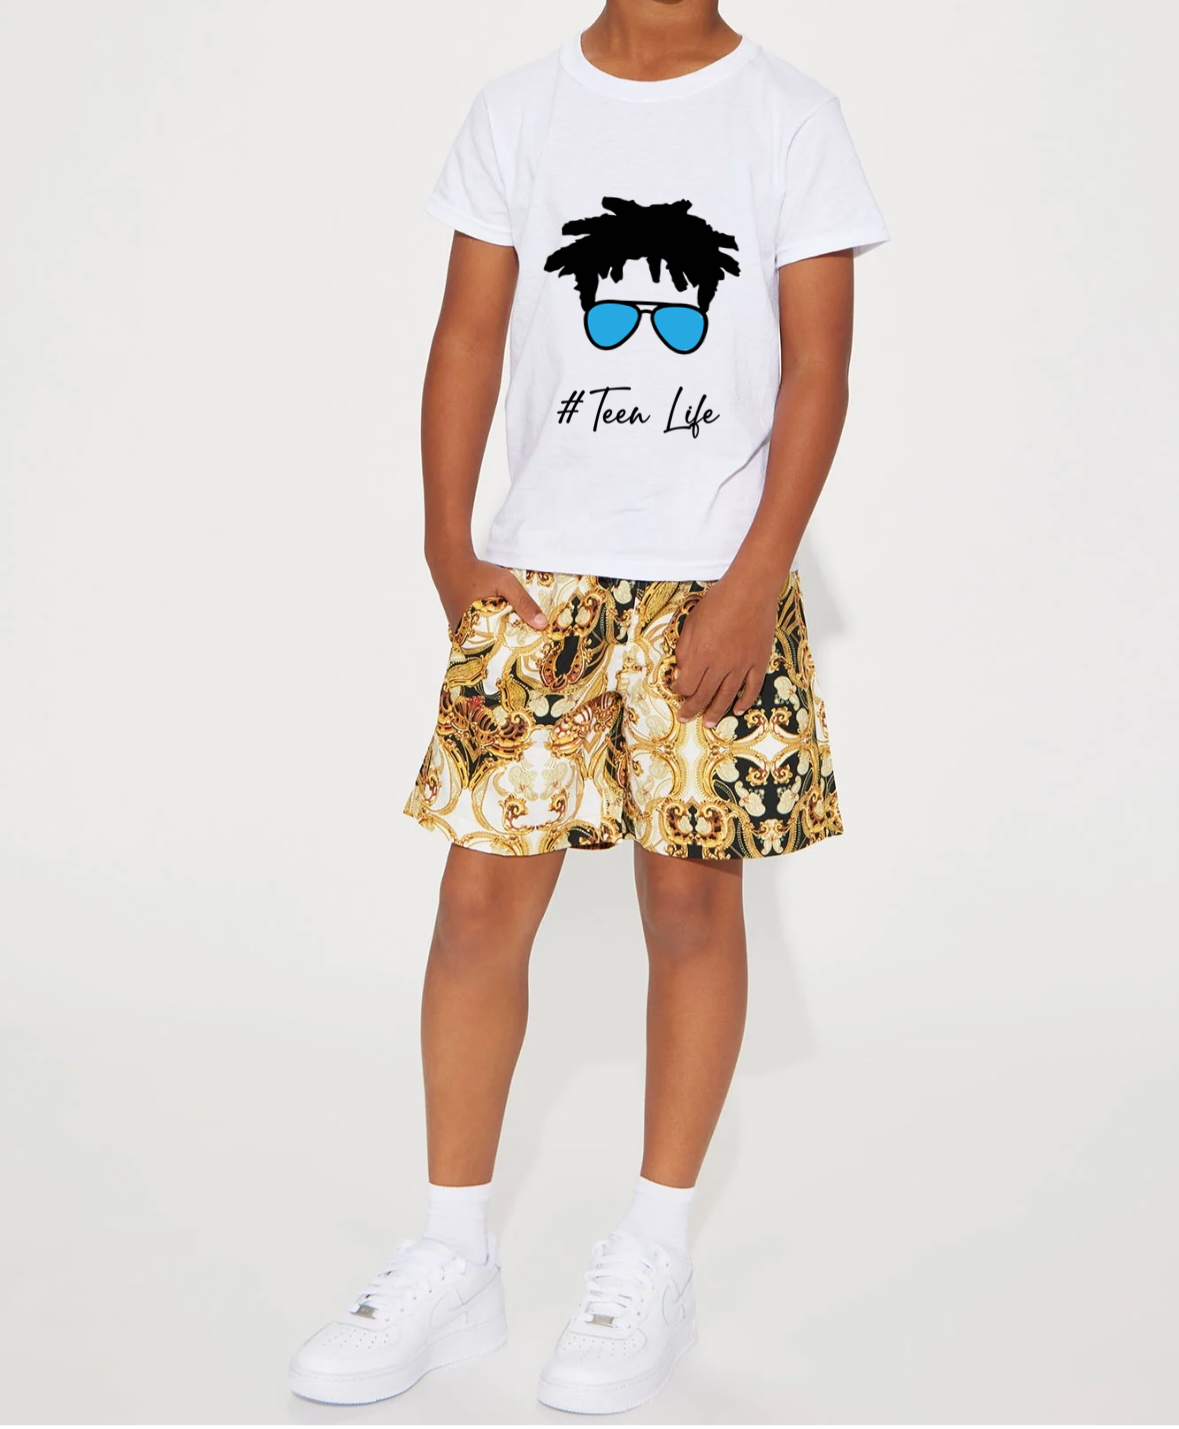 Teen Boys graphic tee shirt by 2fifty2